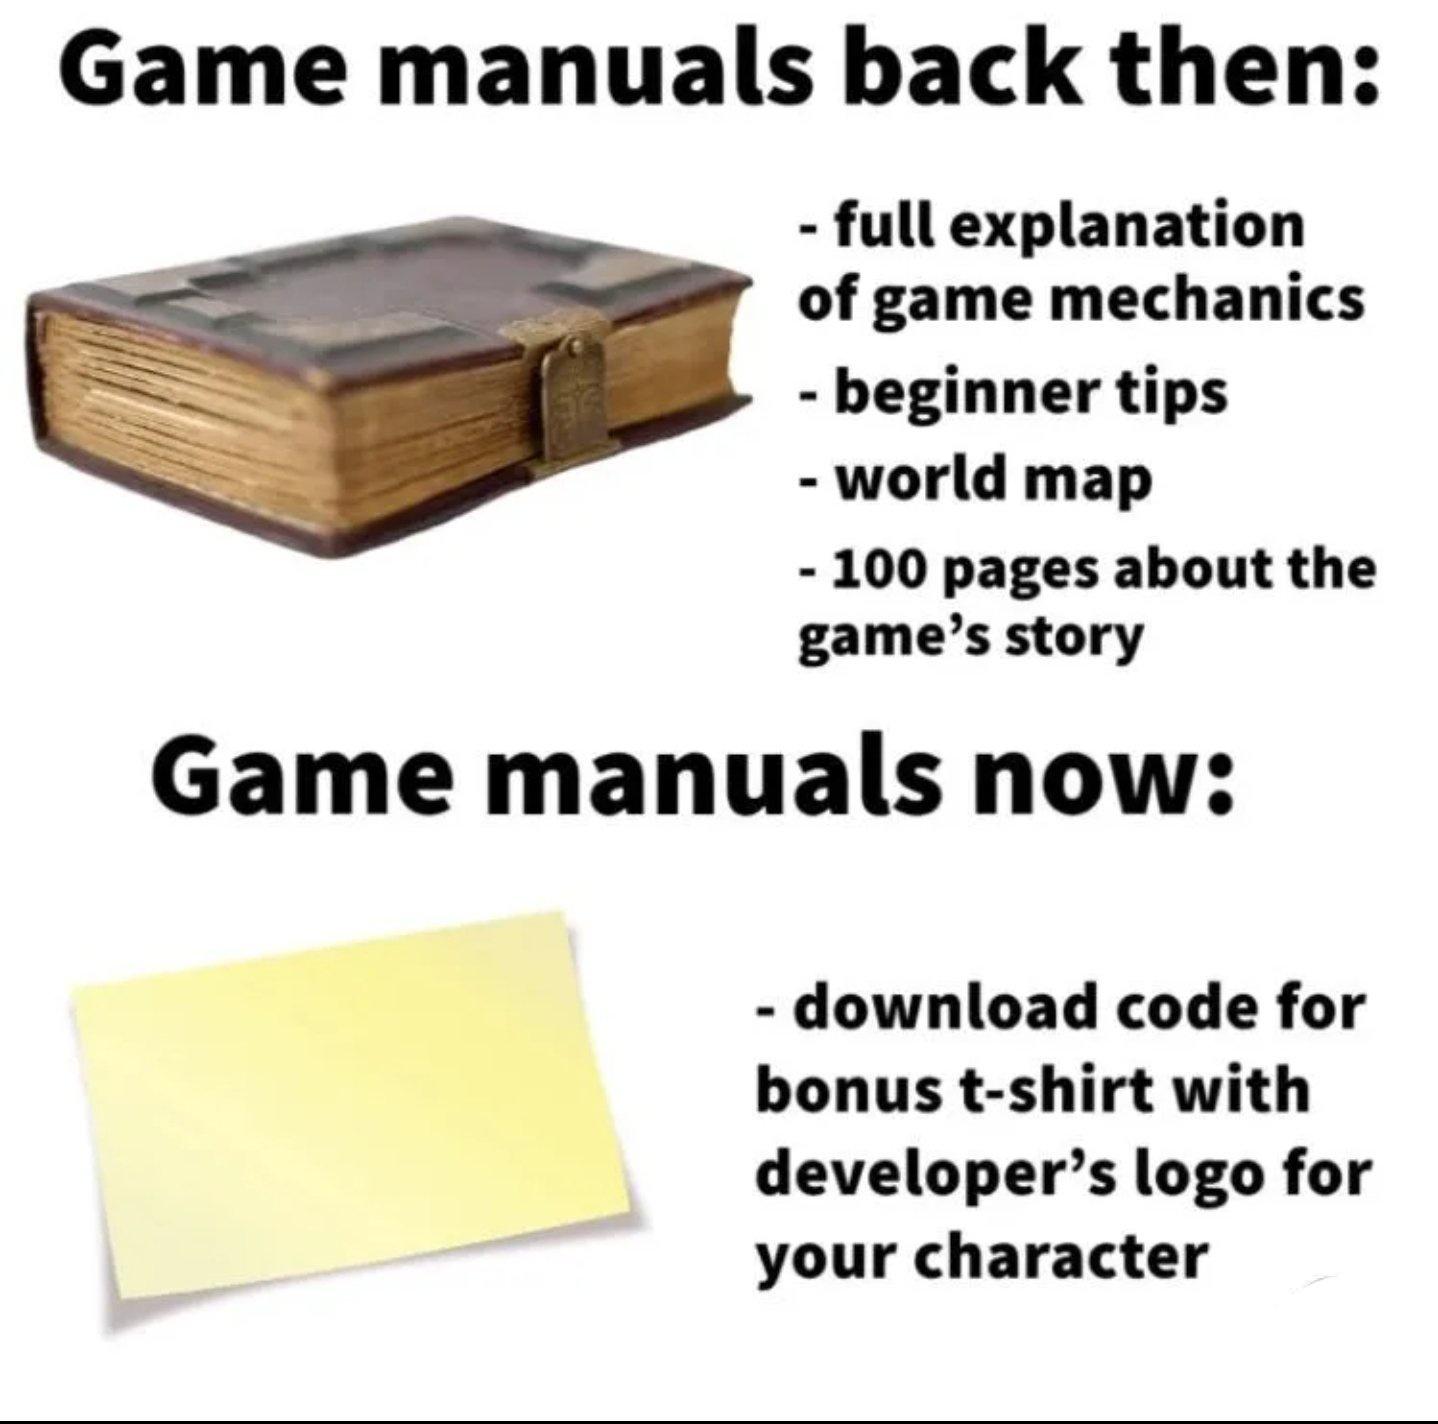 monday morning randomness - Game - Game manuals back then full explanation of game mechanics beginner tips world map 100 pages about the game's story Game manuals now download code for bonus tshirt with developer's logo for your character